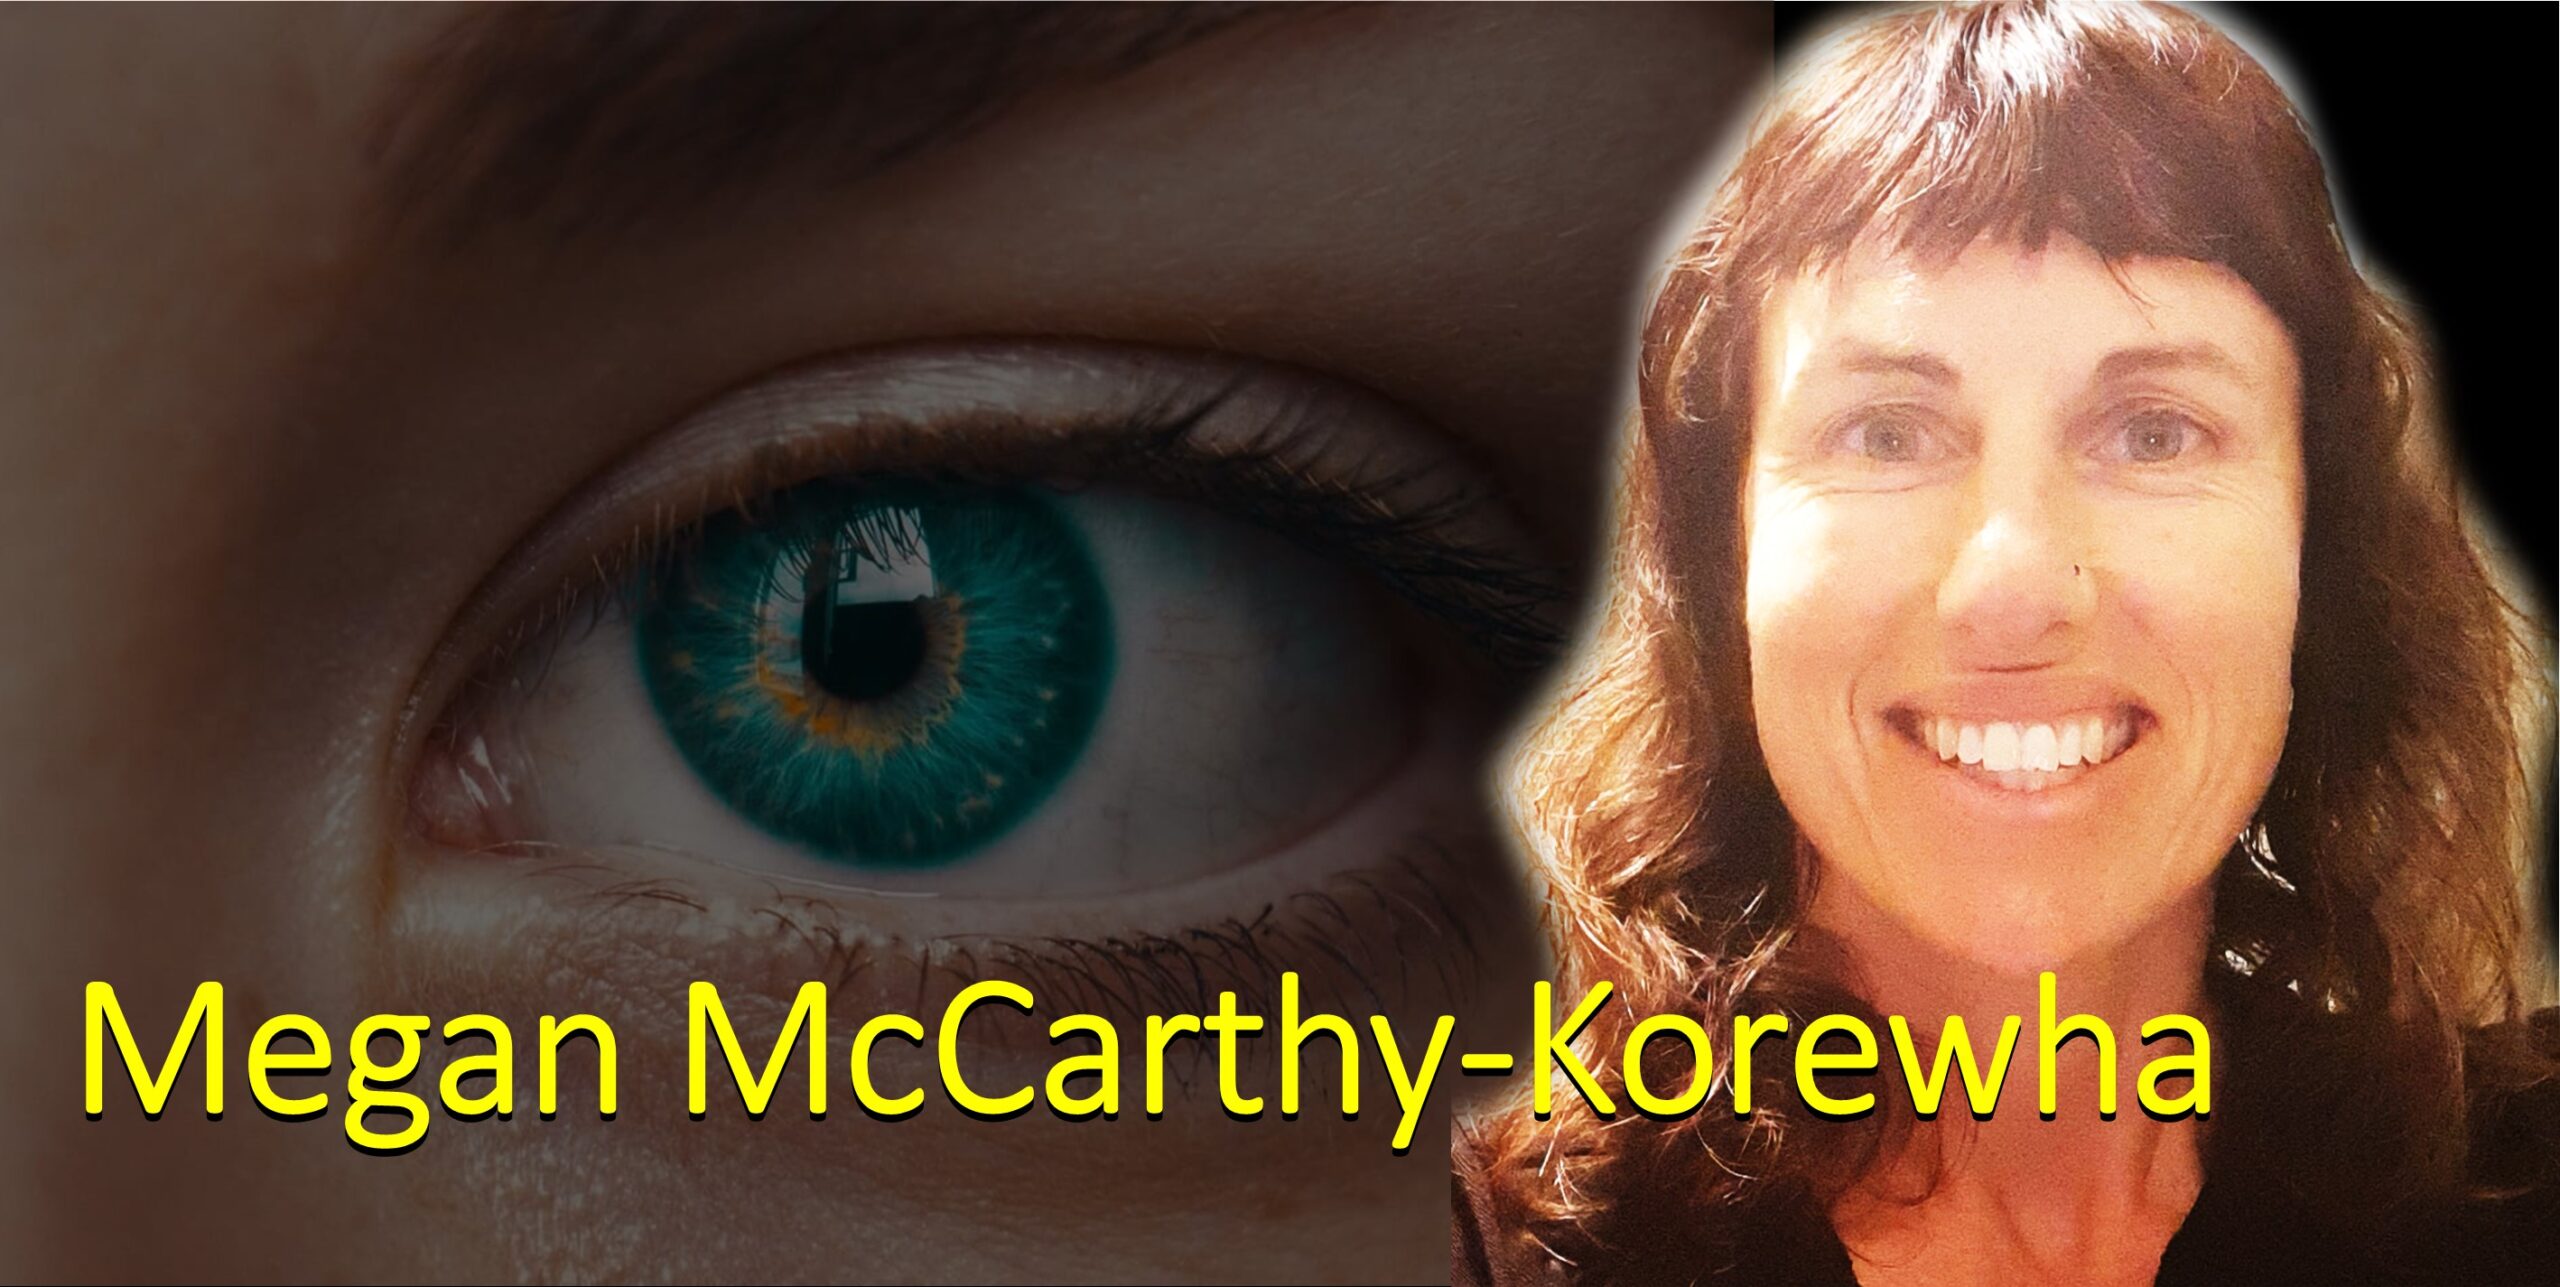 You are currently viewing Megan McCarthy-Korewha